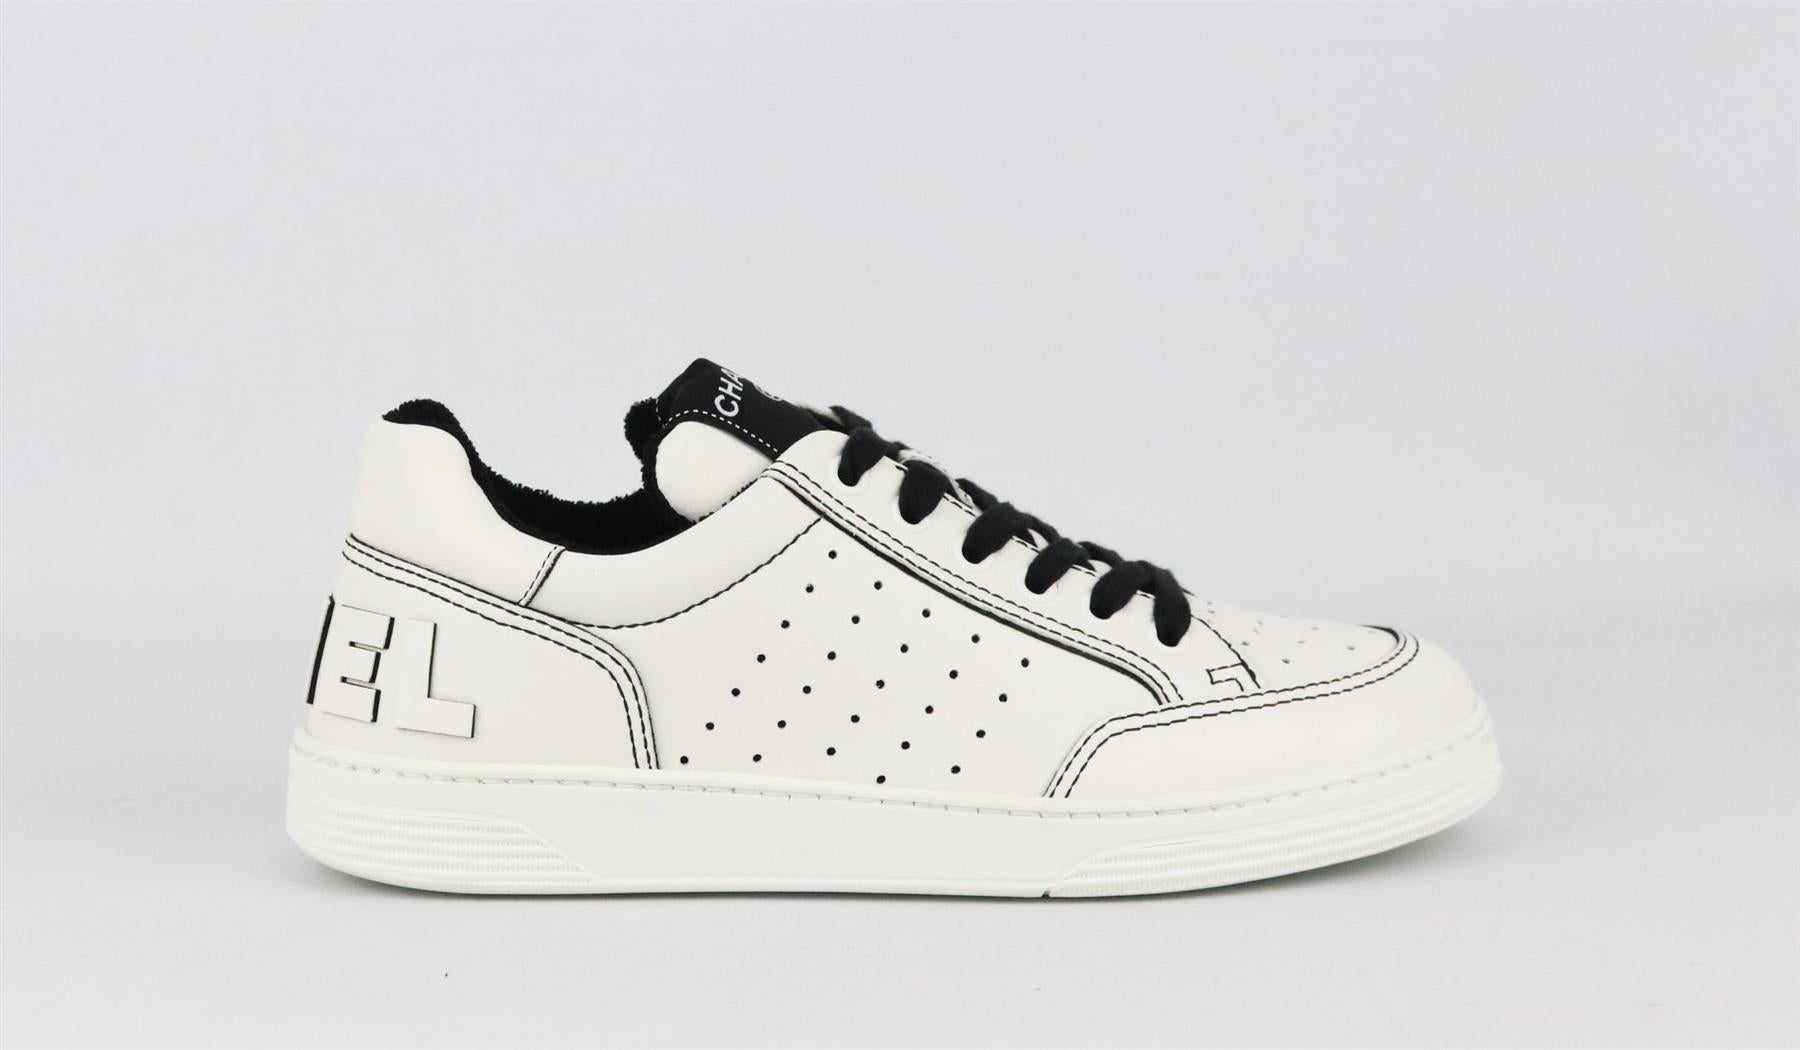 Part of Chanel's 2021 Collection, these low-top sneakers have been made from durable calfskin leather, they have the brand's logo on the back in leather and finished with contrast stitching and thick black laces and terry-cloth interior to make it